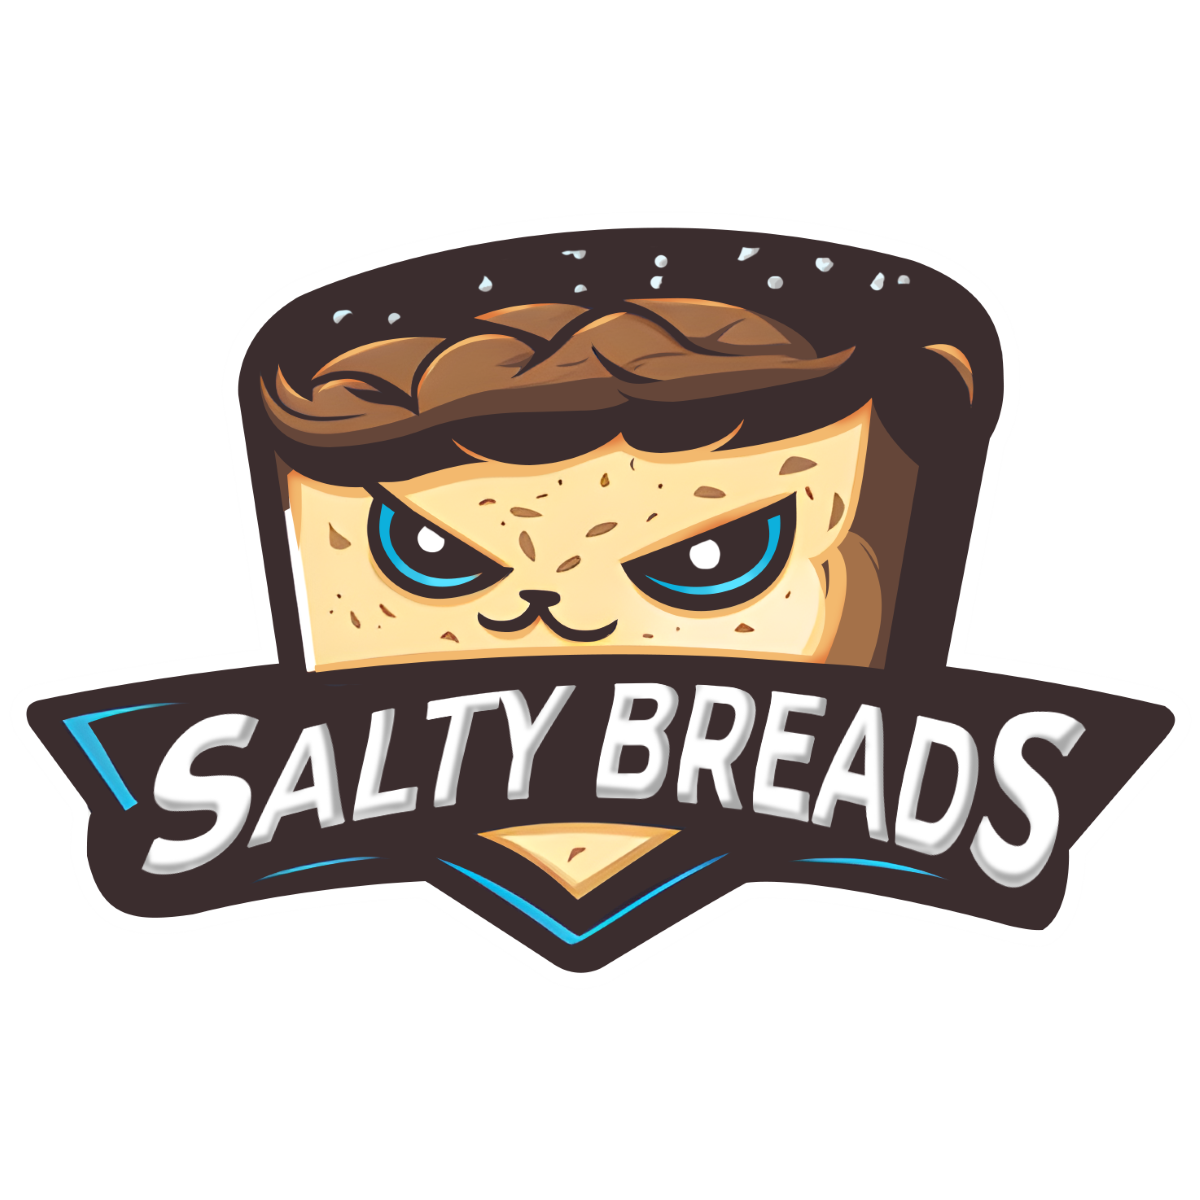 Salty Breads